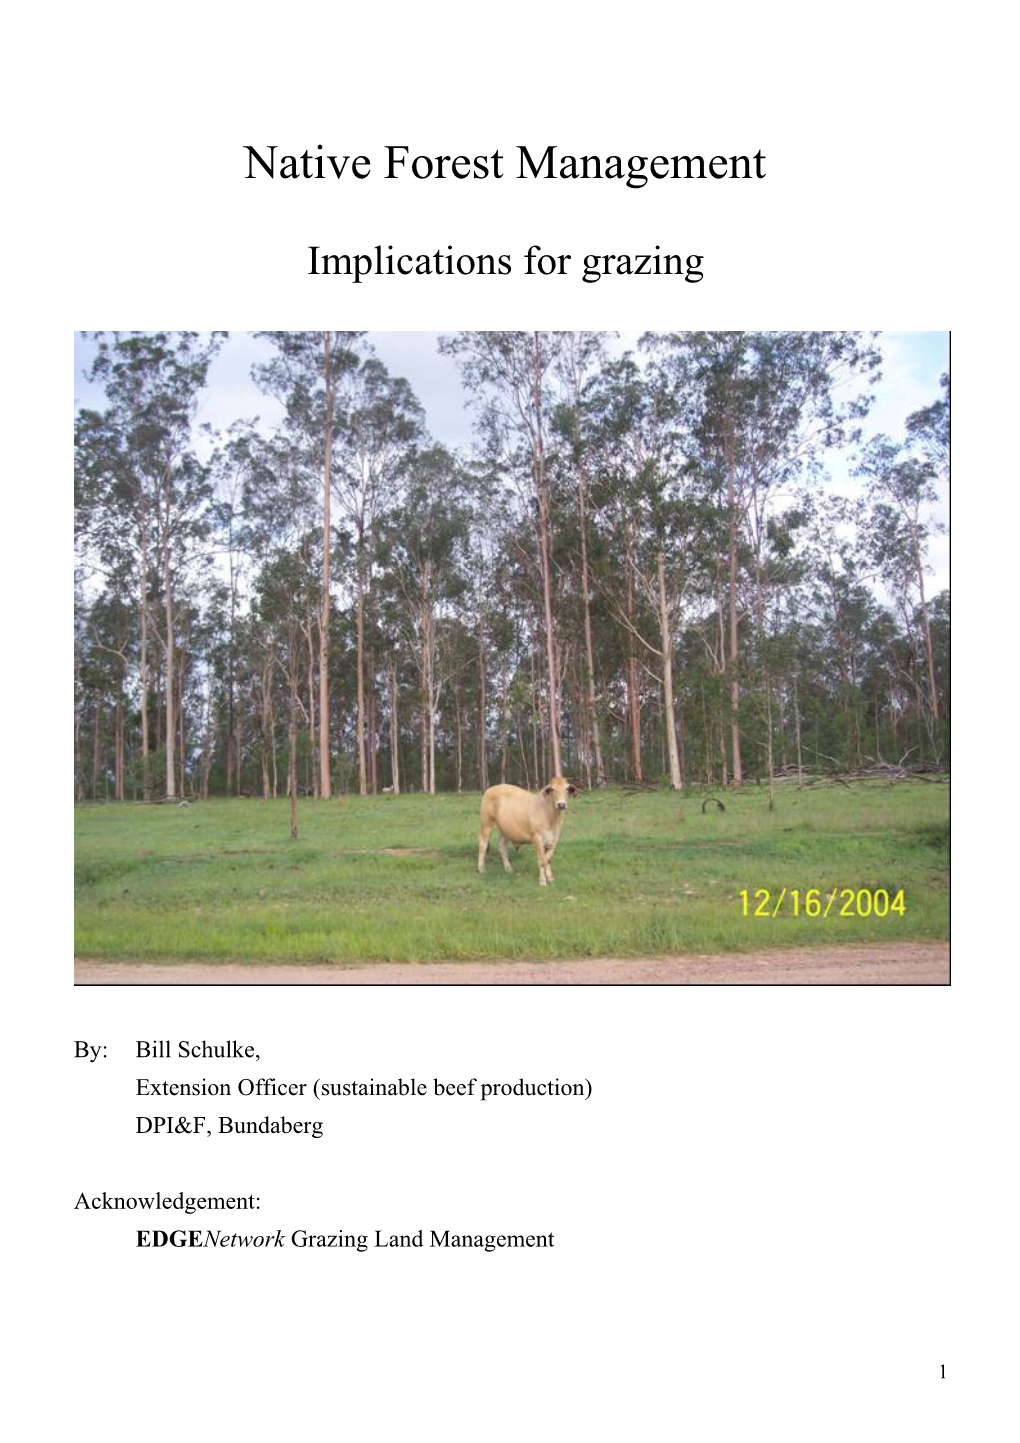 Native Forest Management Implications for Grazing